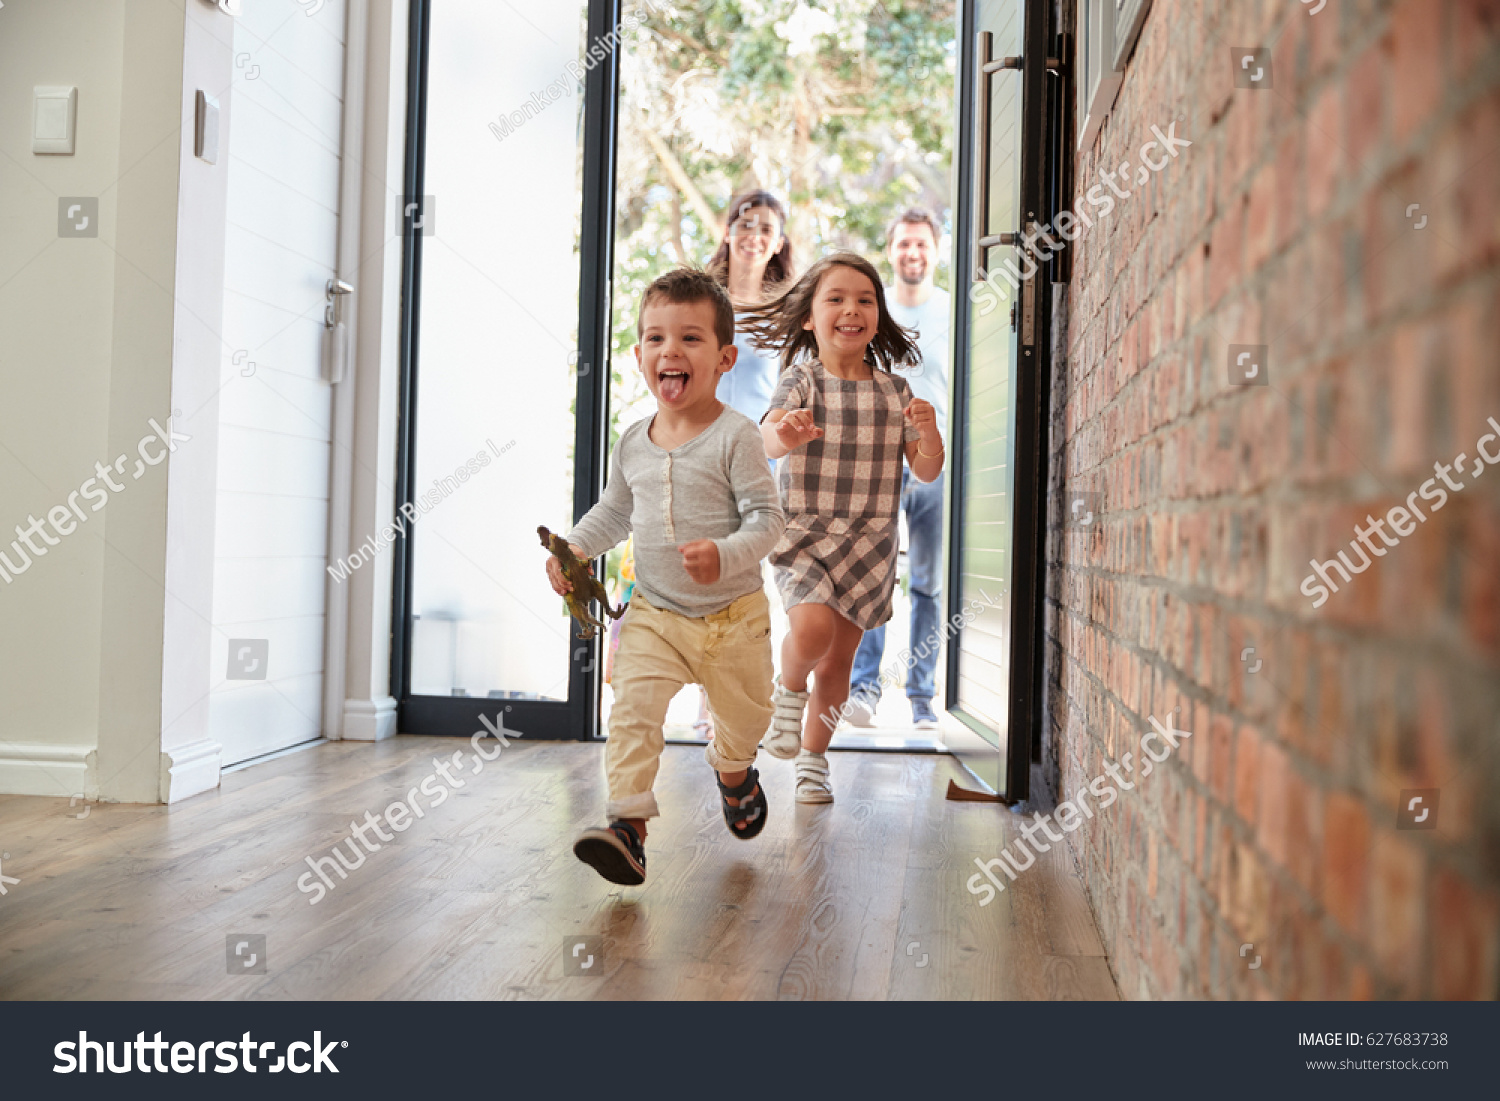 Excited Children Arriving Home With Parents #627683738